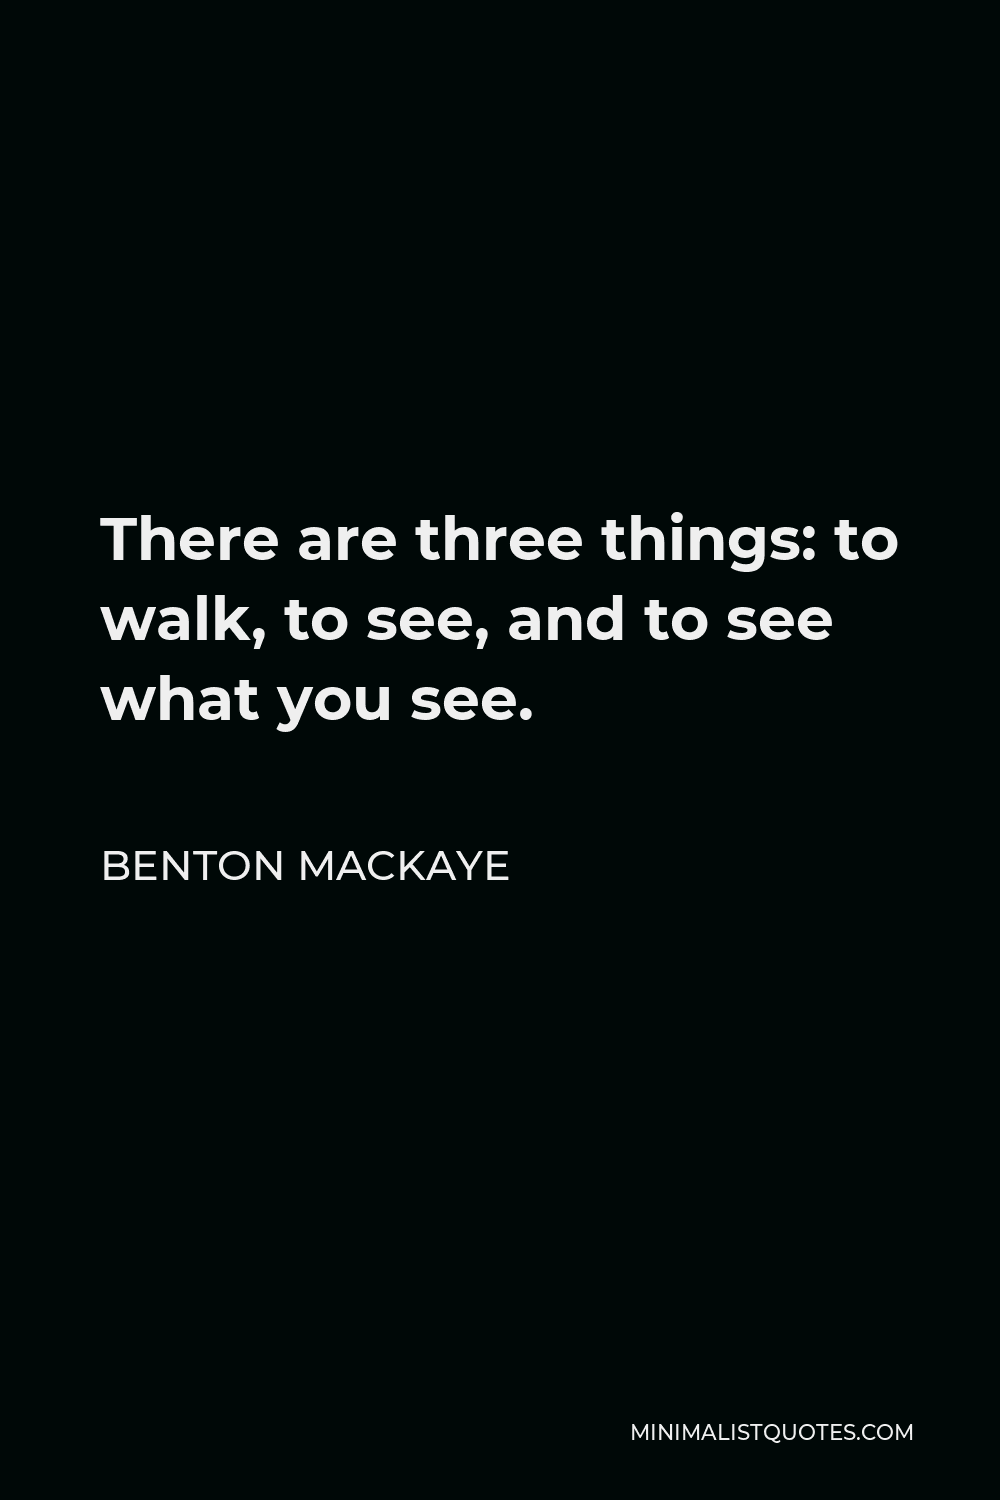 Benton MacKaye Quote - There are three things: to walk, to see, and to see what you see.